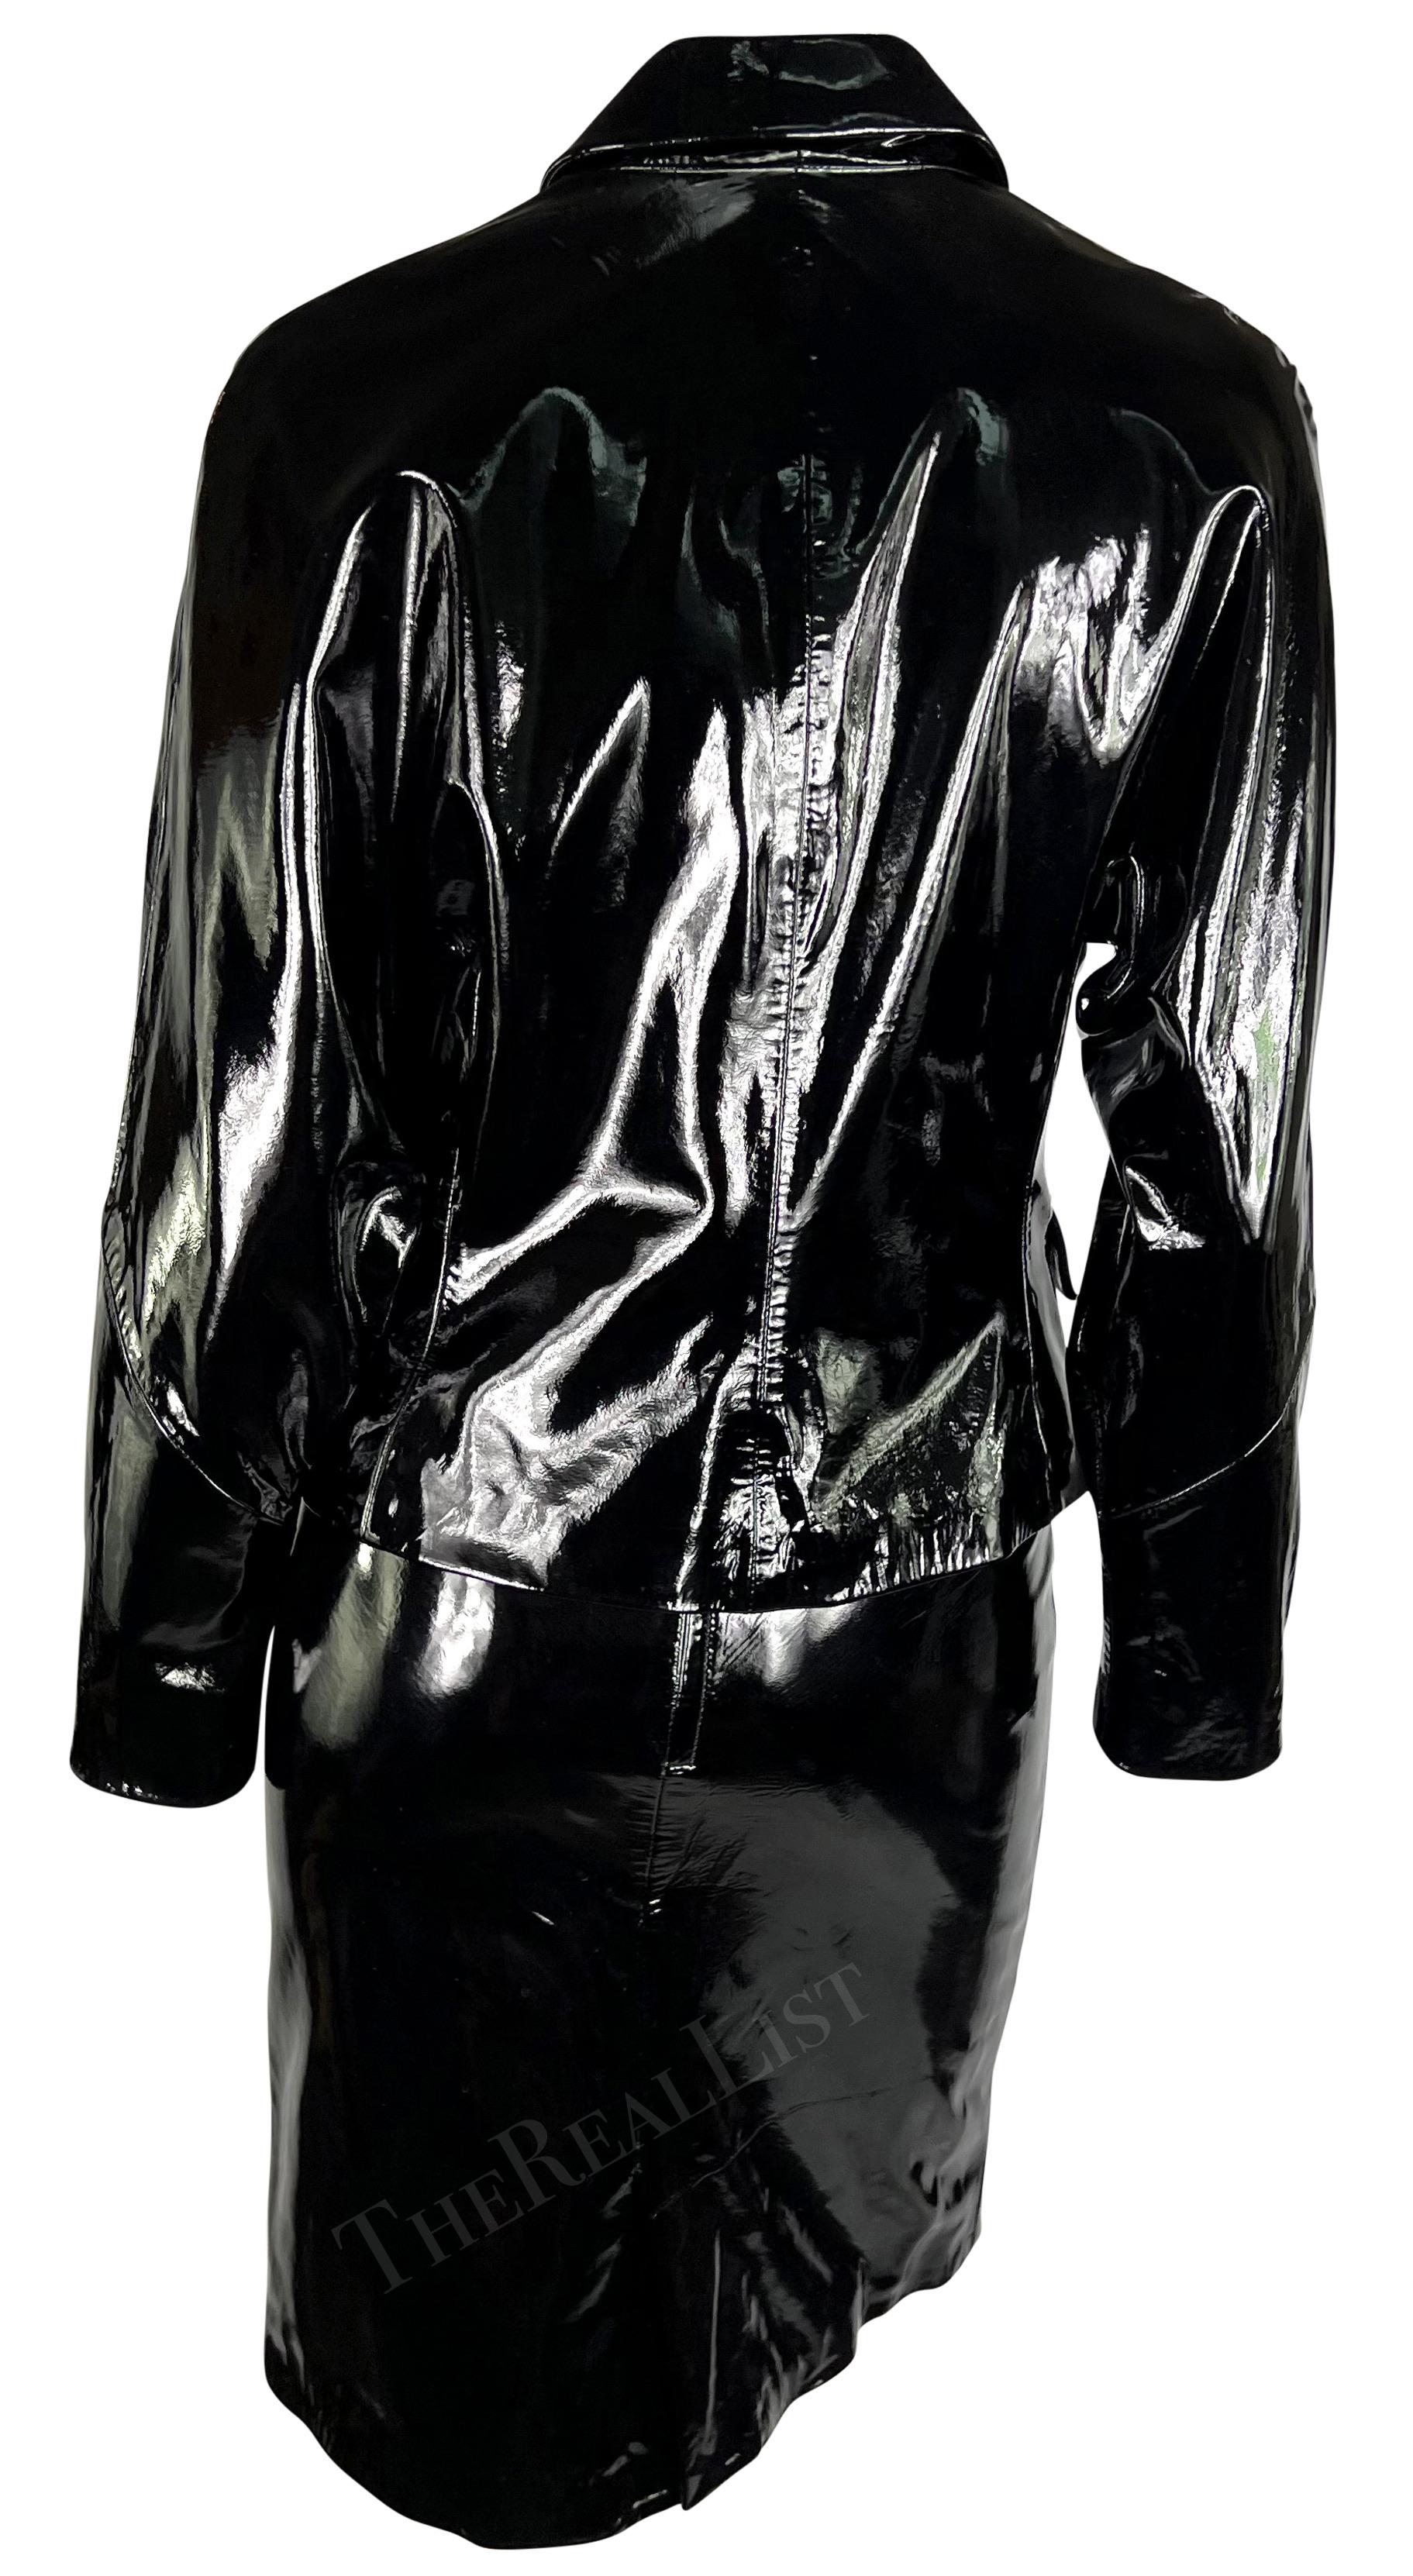 S/S 2001 Gianni Versace by Dontella Runway Black Patent Leather Moto Skirt Suit  6